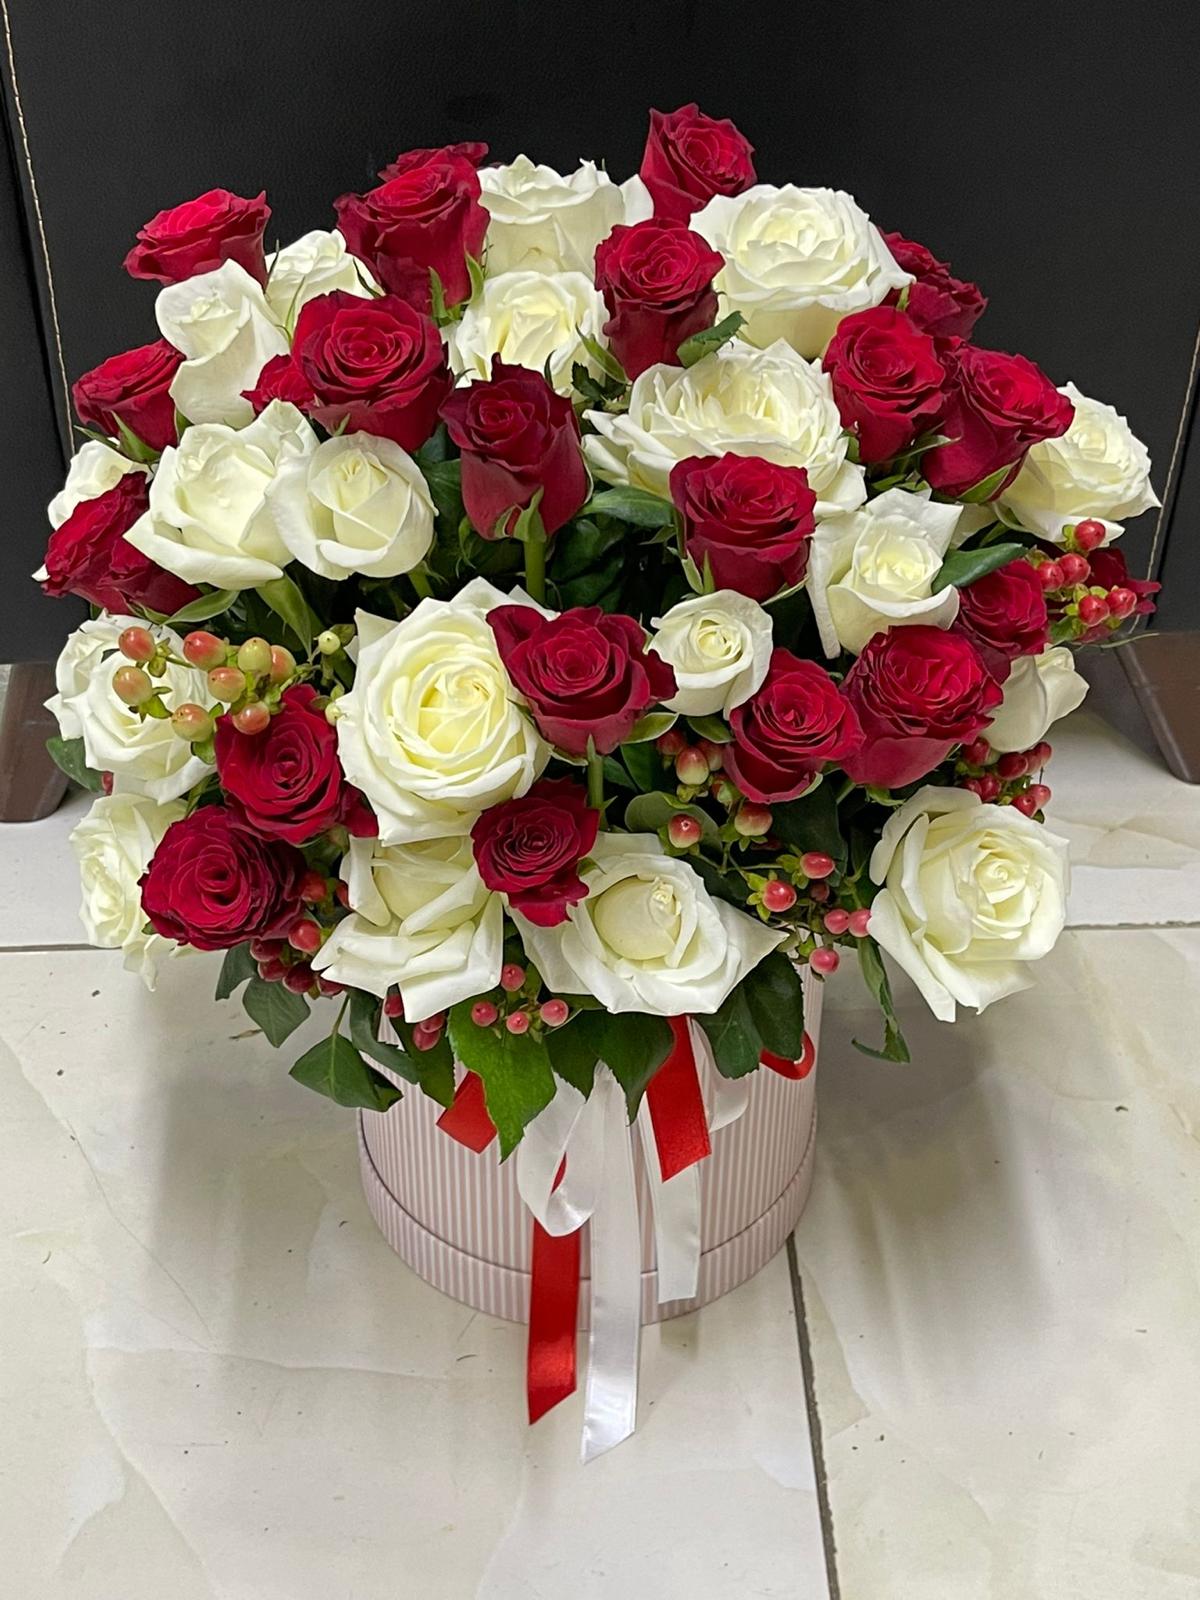  Kemer Flower Order White & Red Roses 51 Pieces in a Box